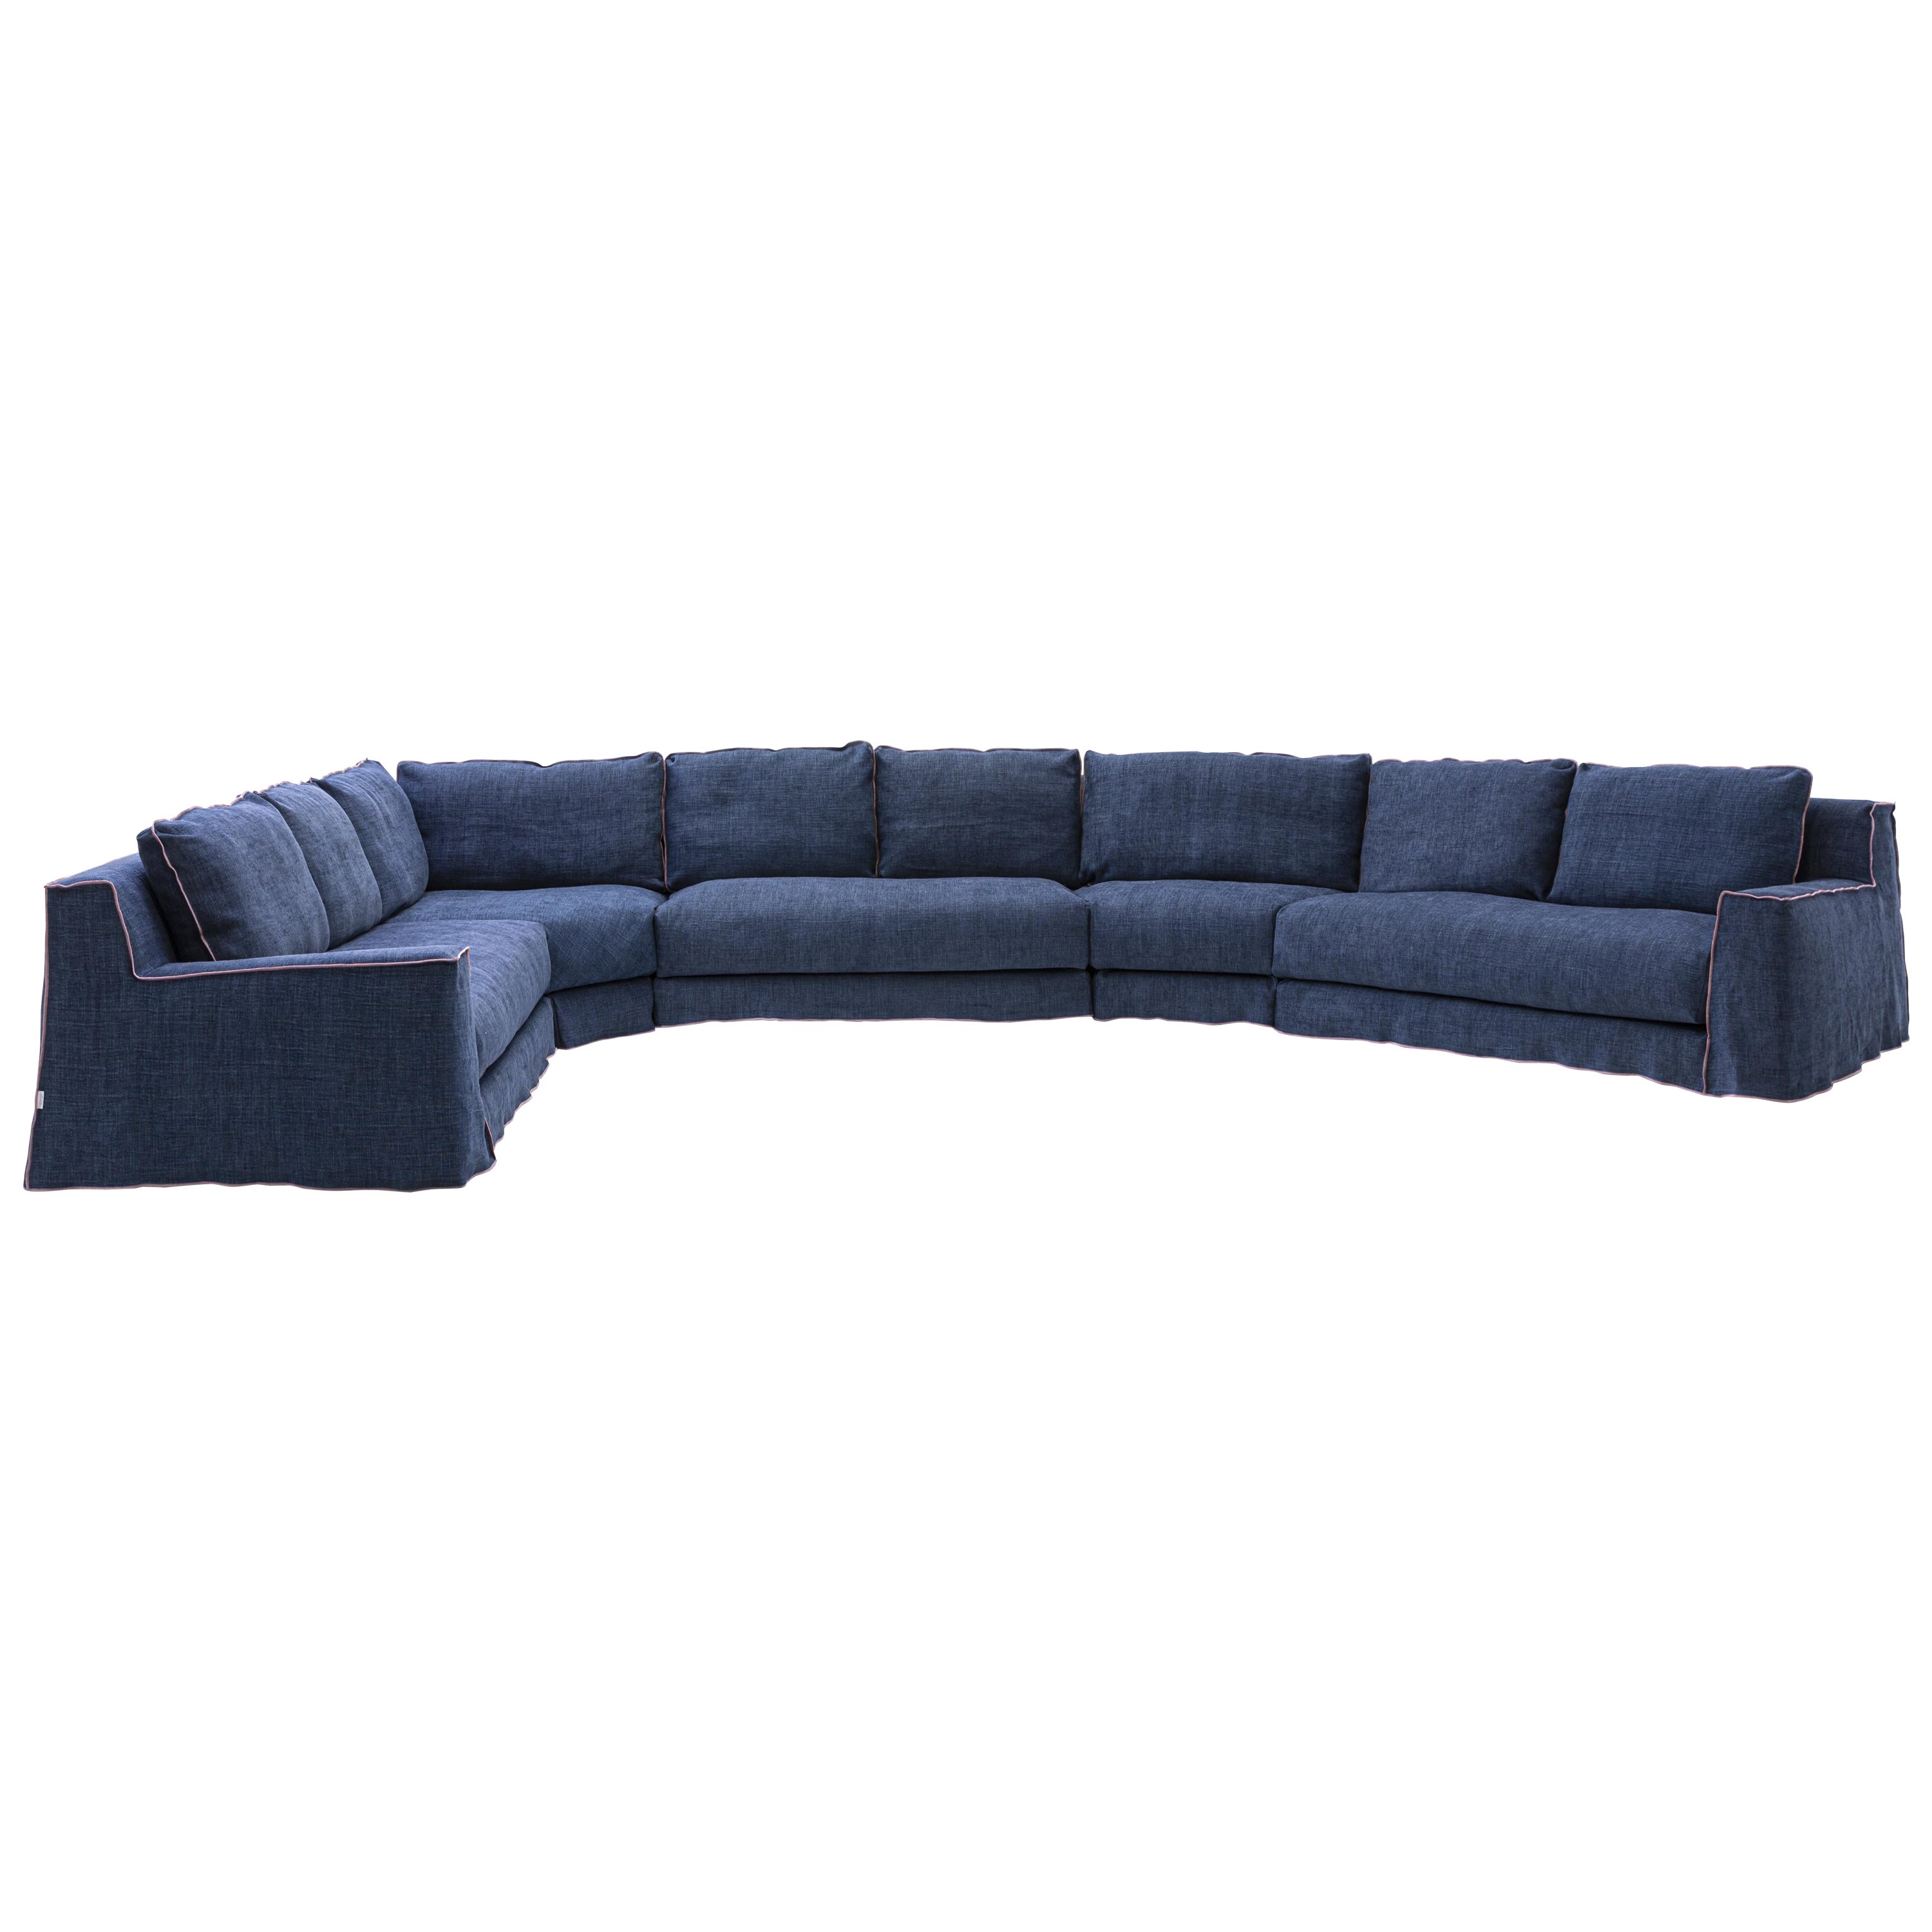 Gervasoni Loll 11 Modular Sofa in Munch Upholstery by Paola Navone For Sale